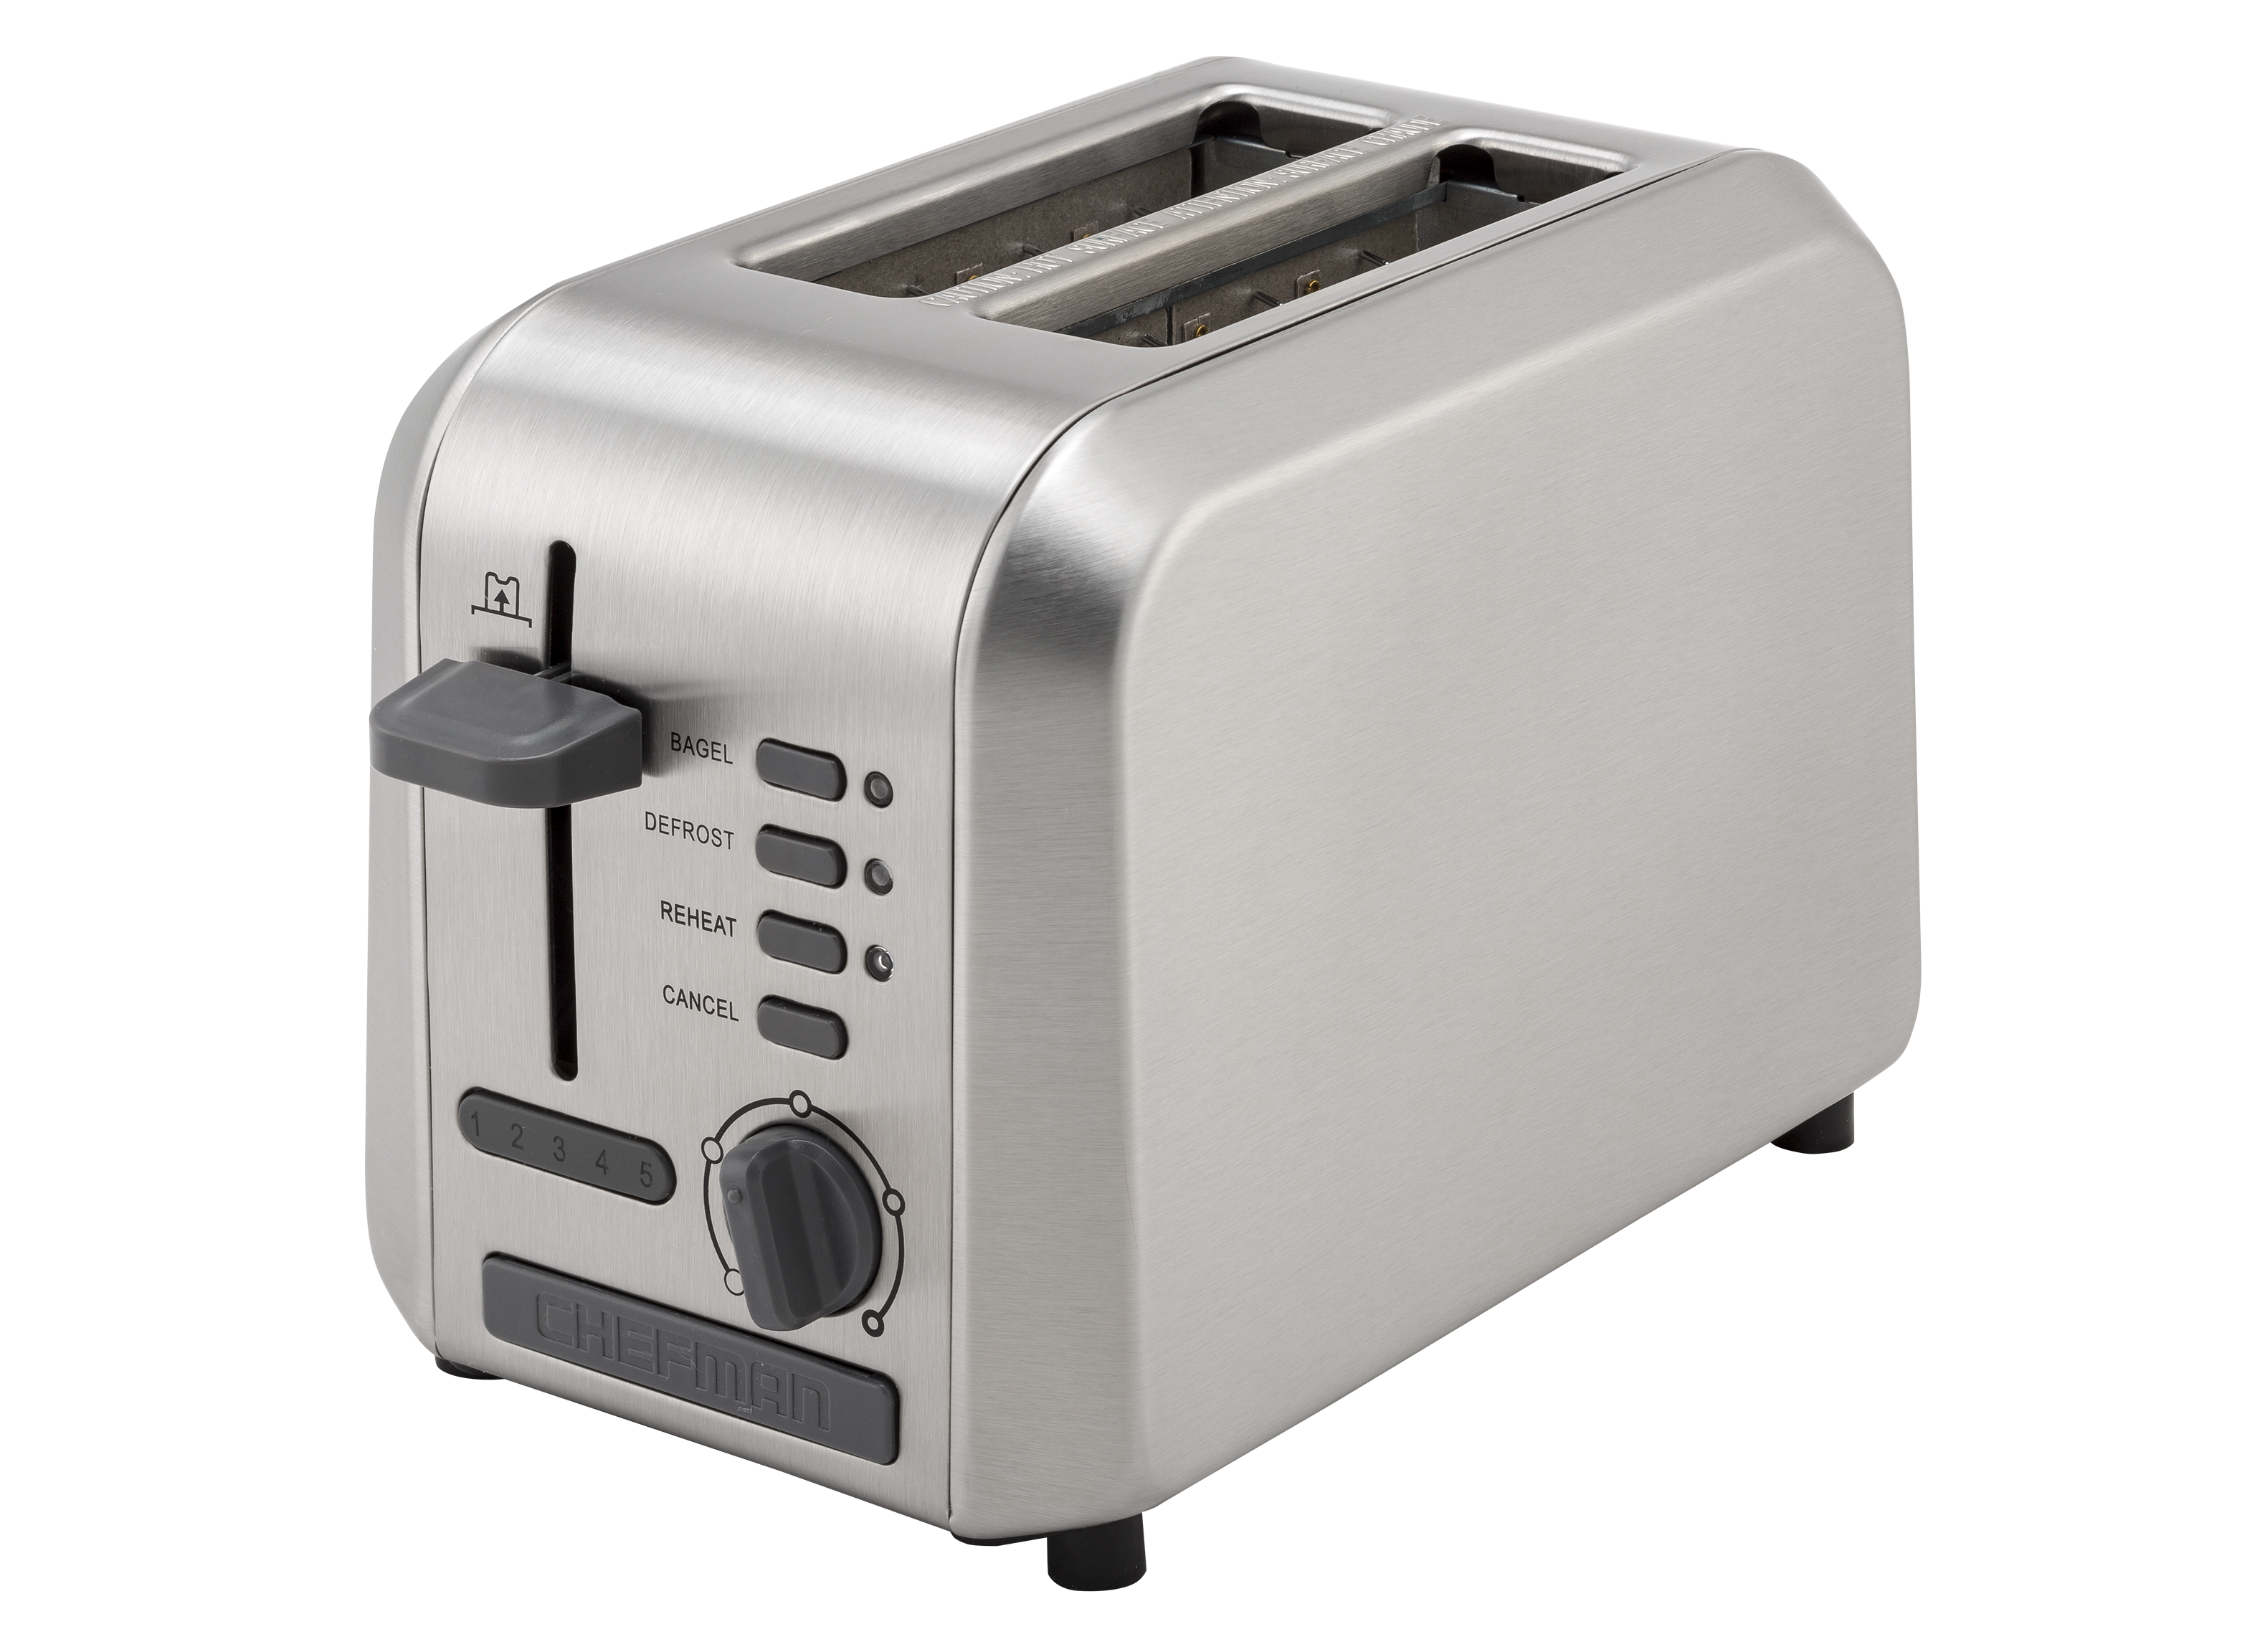 https://crdms.images.consumerreports.org/prod/products/cr/models/387662-toasters-chefman-2slicewideslotstainlesssteelrj31ss.png